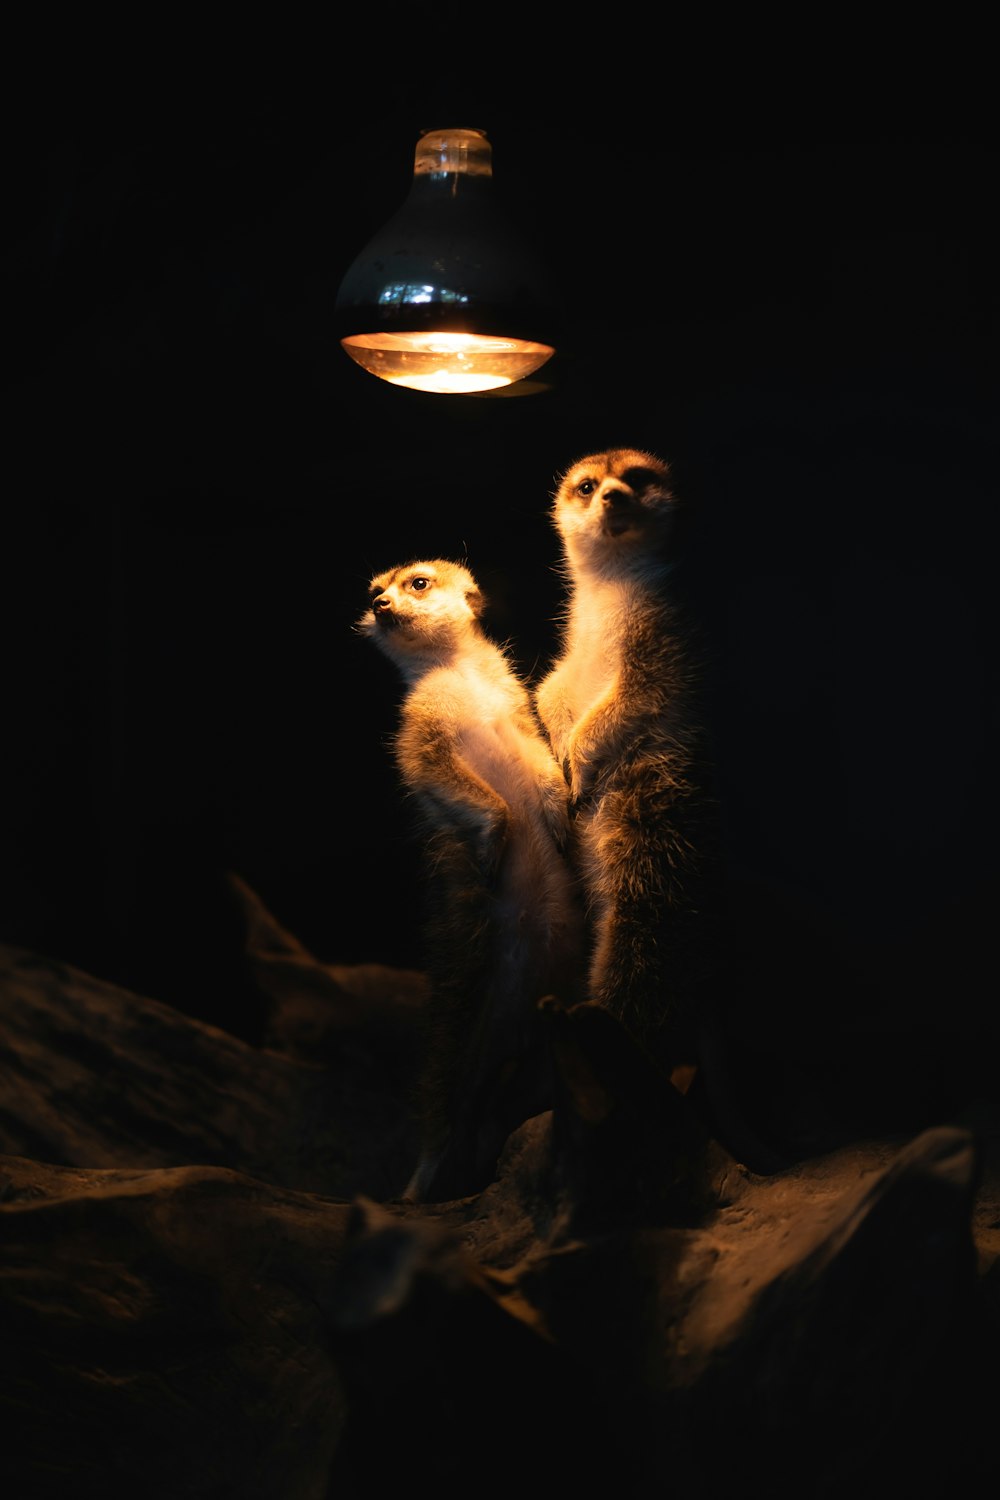 two meerkats standing next to each other in the dark